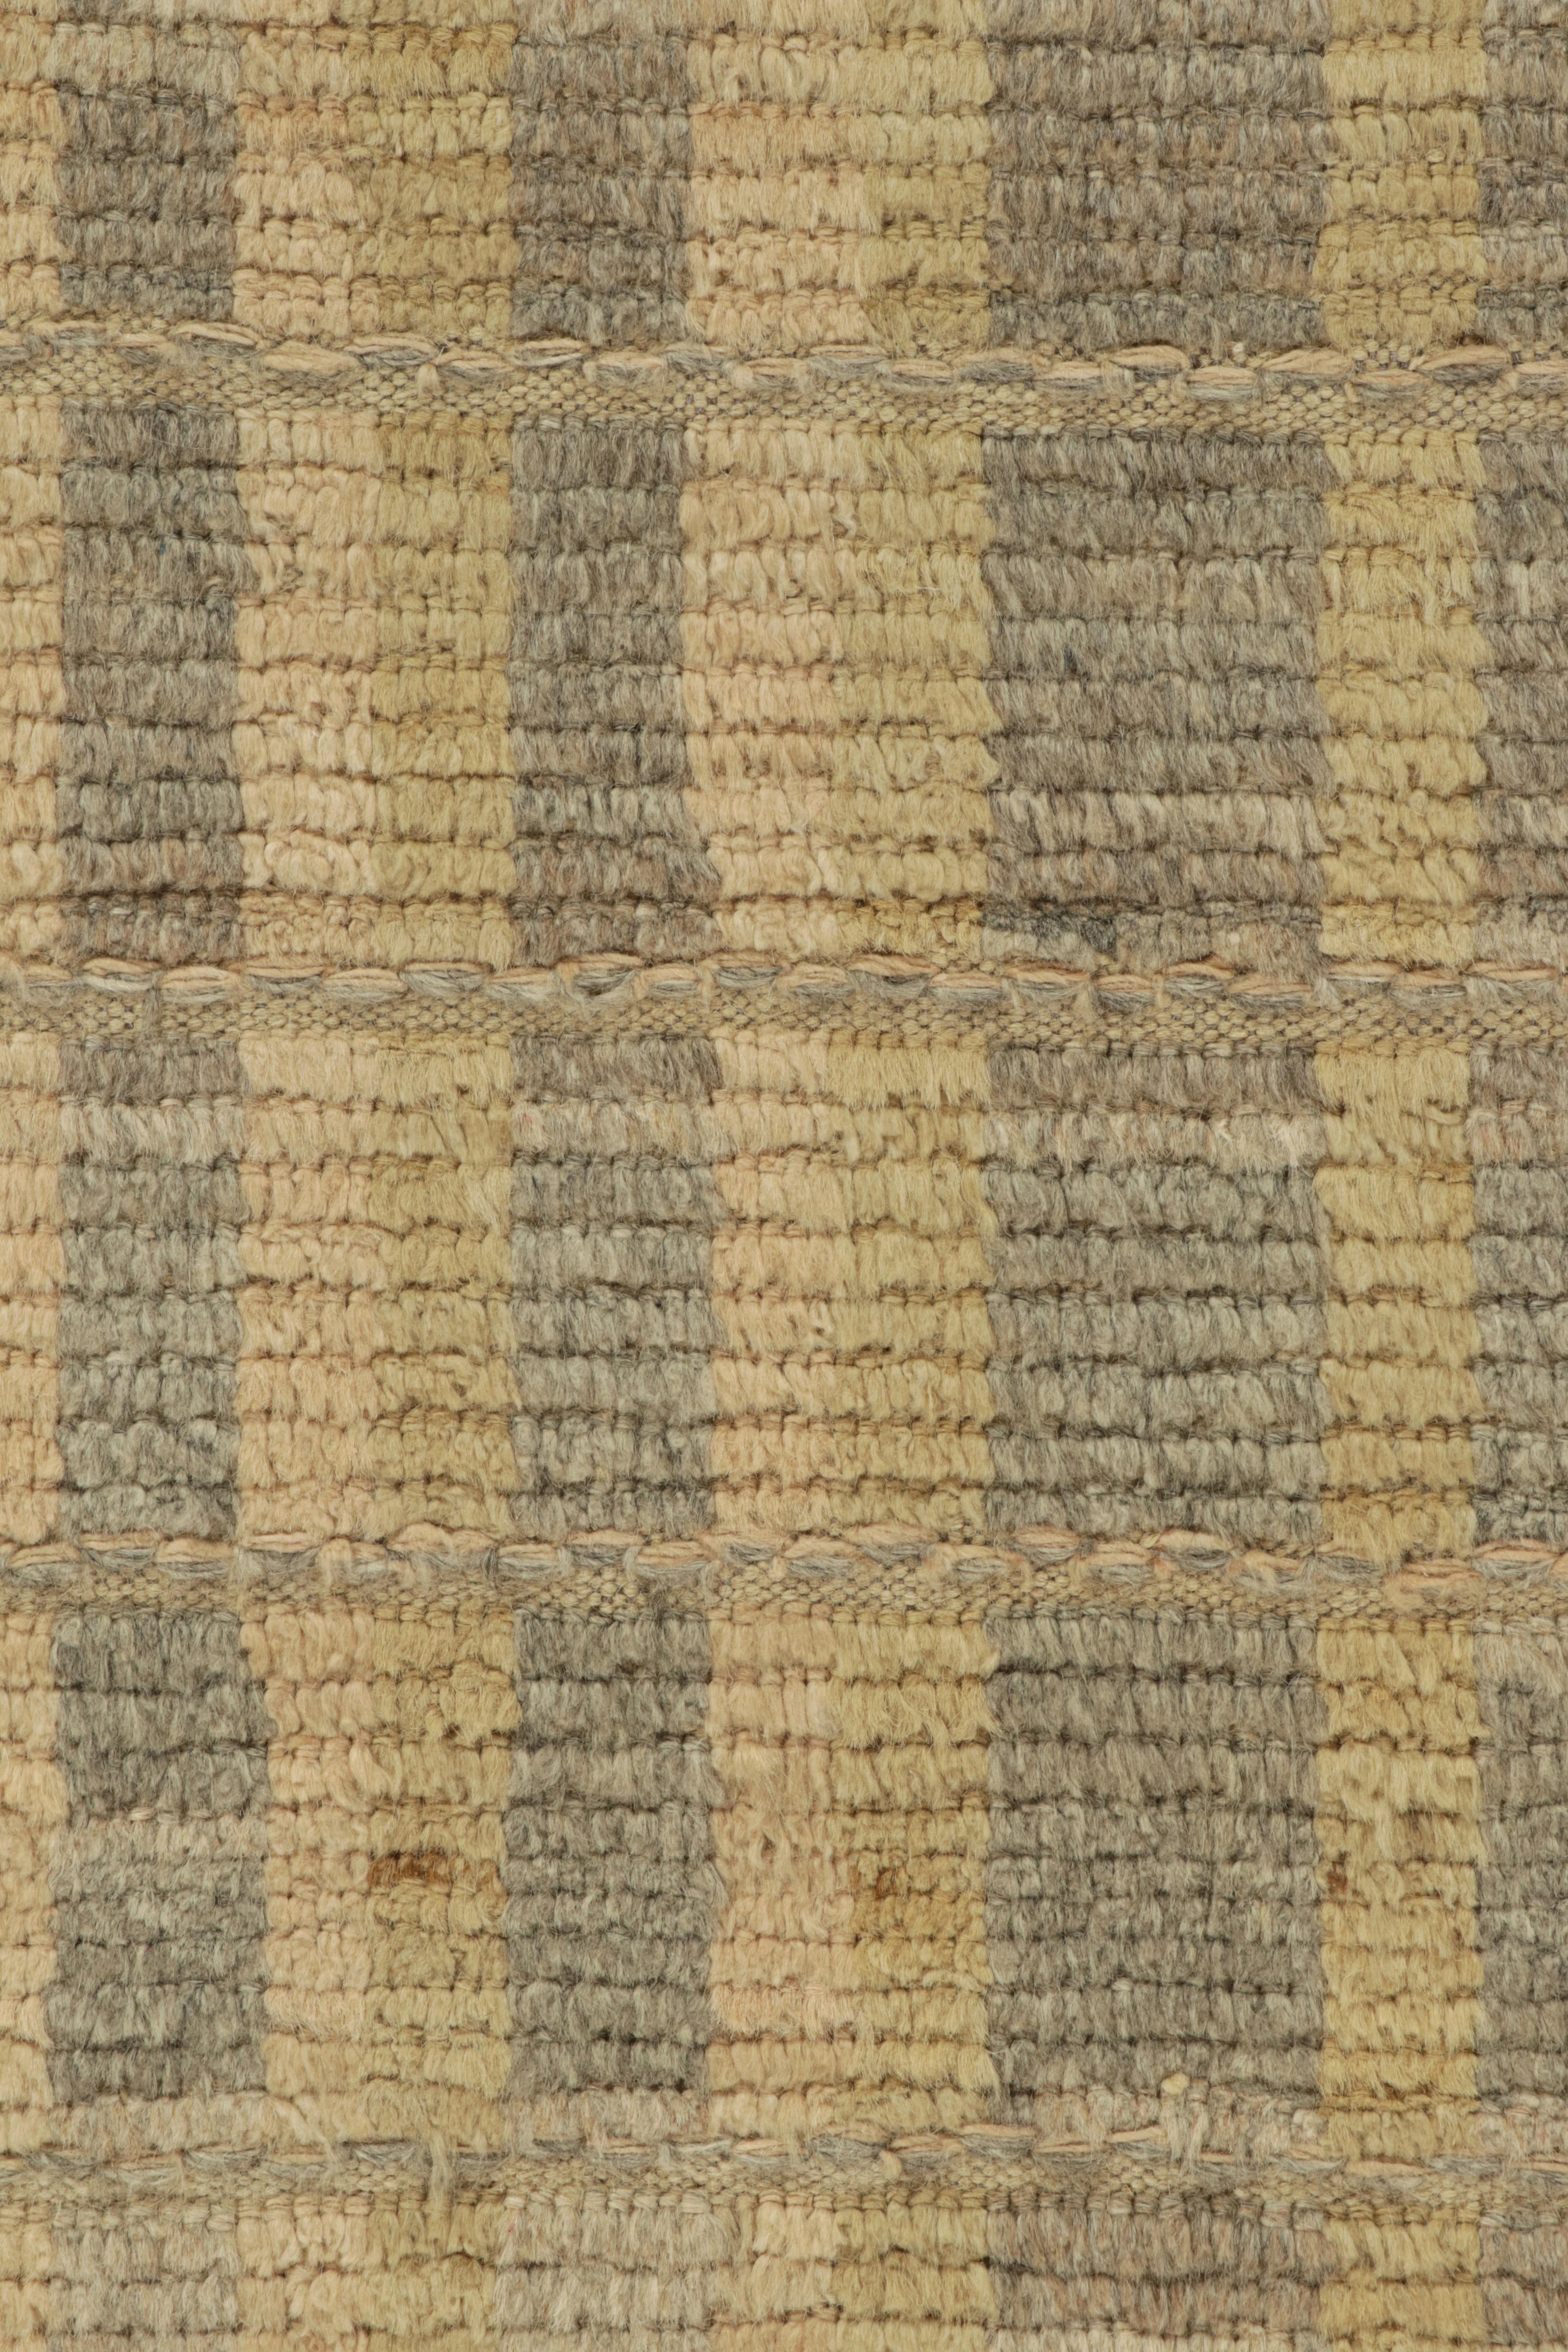 Rug & Kilim's Moroccan Style Runner in Beige-Brown Geometric Pattern In New Condition For Sale In Long Island City, NY